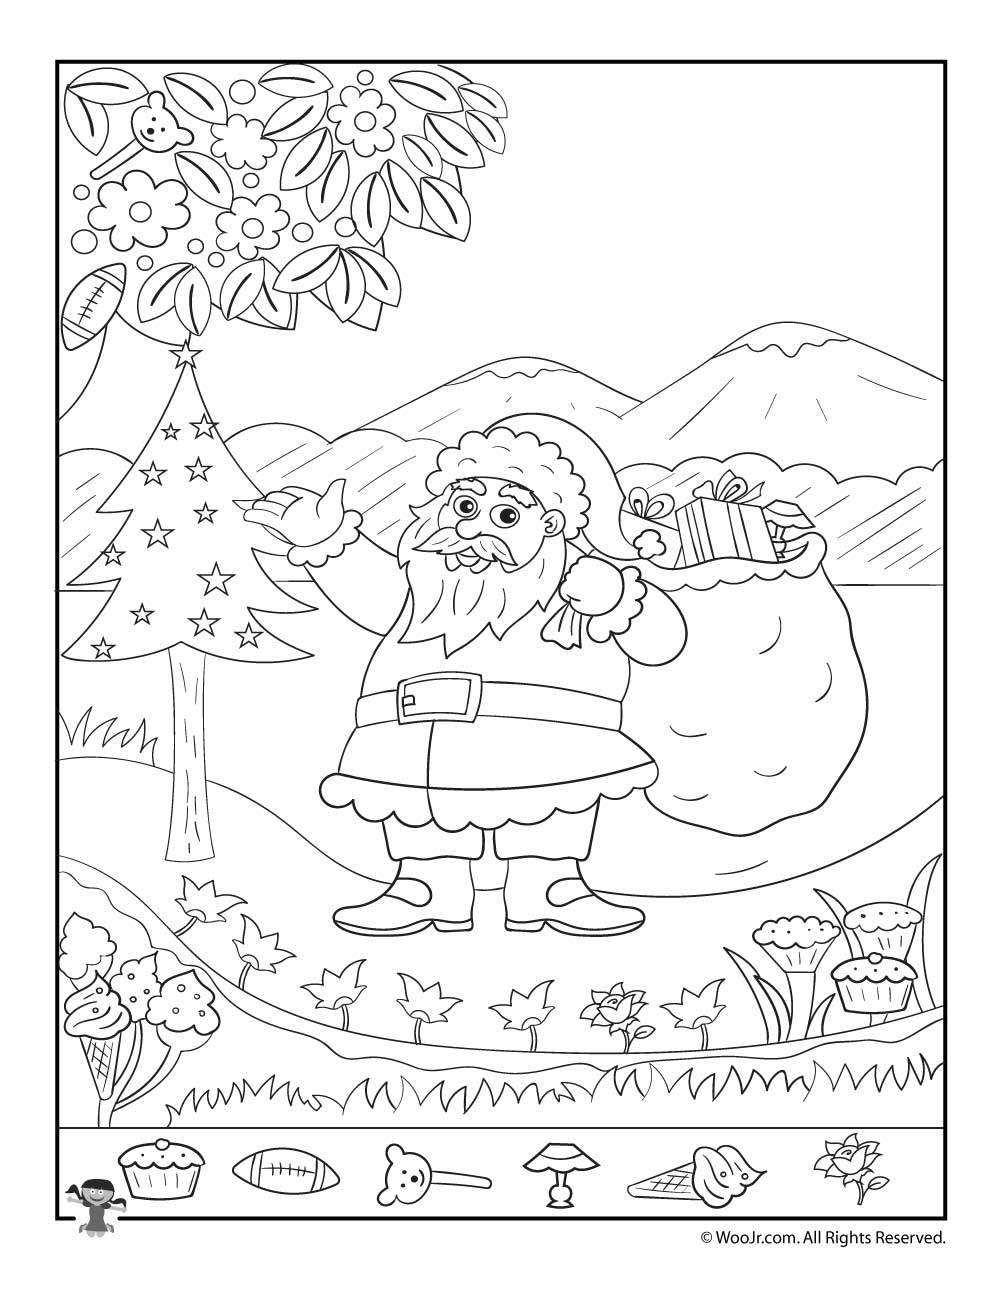 Christmas Hidden Pictures Printables For Kids | Woo! Jr. Kids Activities - Free Printable Christmas Hidden Picture Games